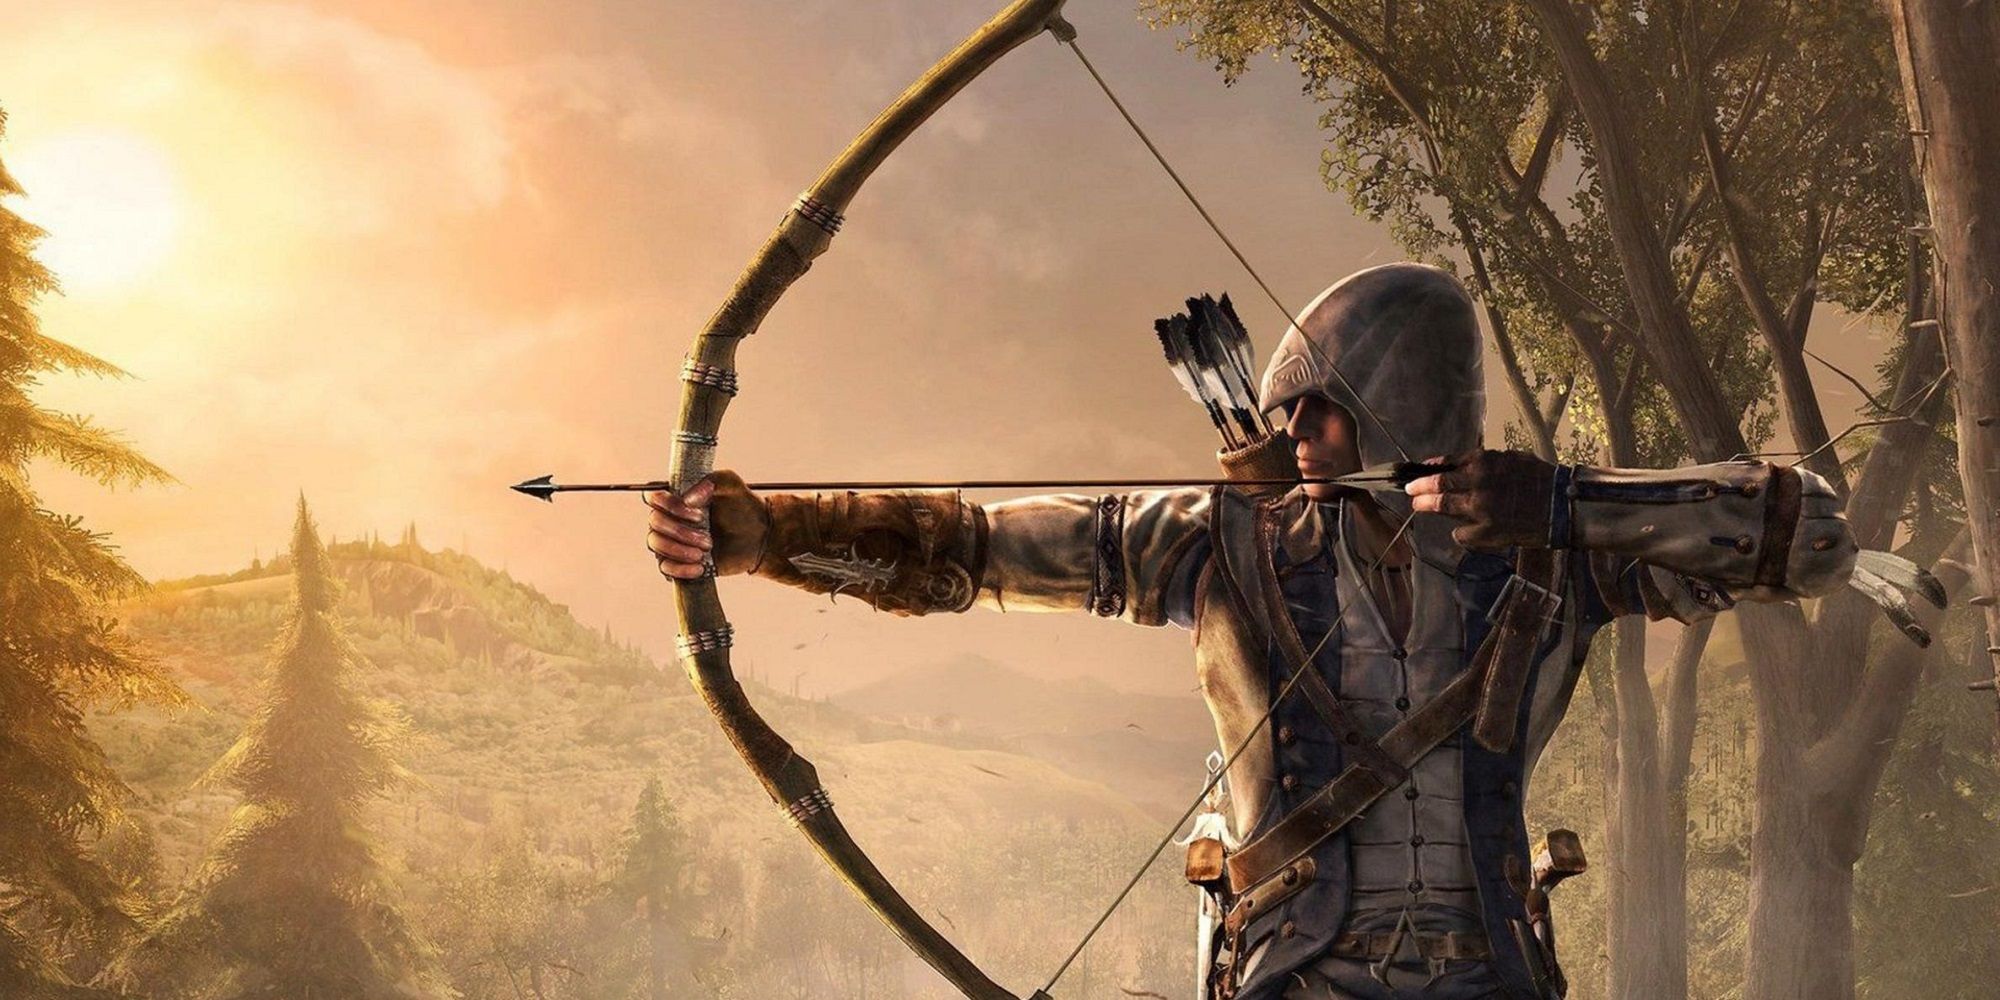 connor drawing a bow in a forest in assassins creed 3